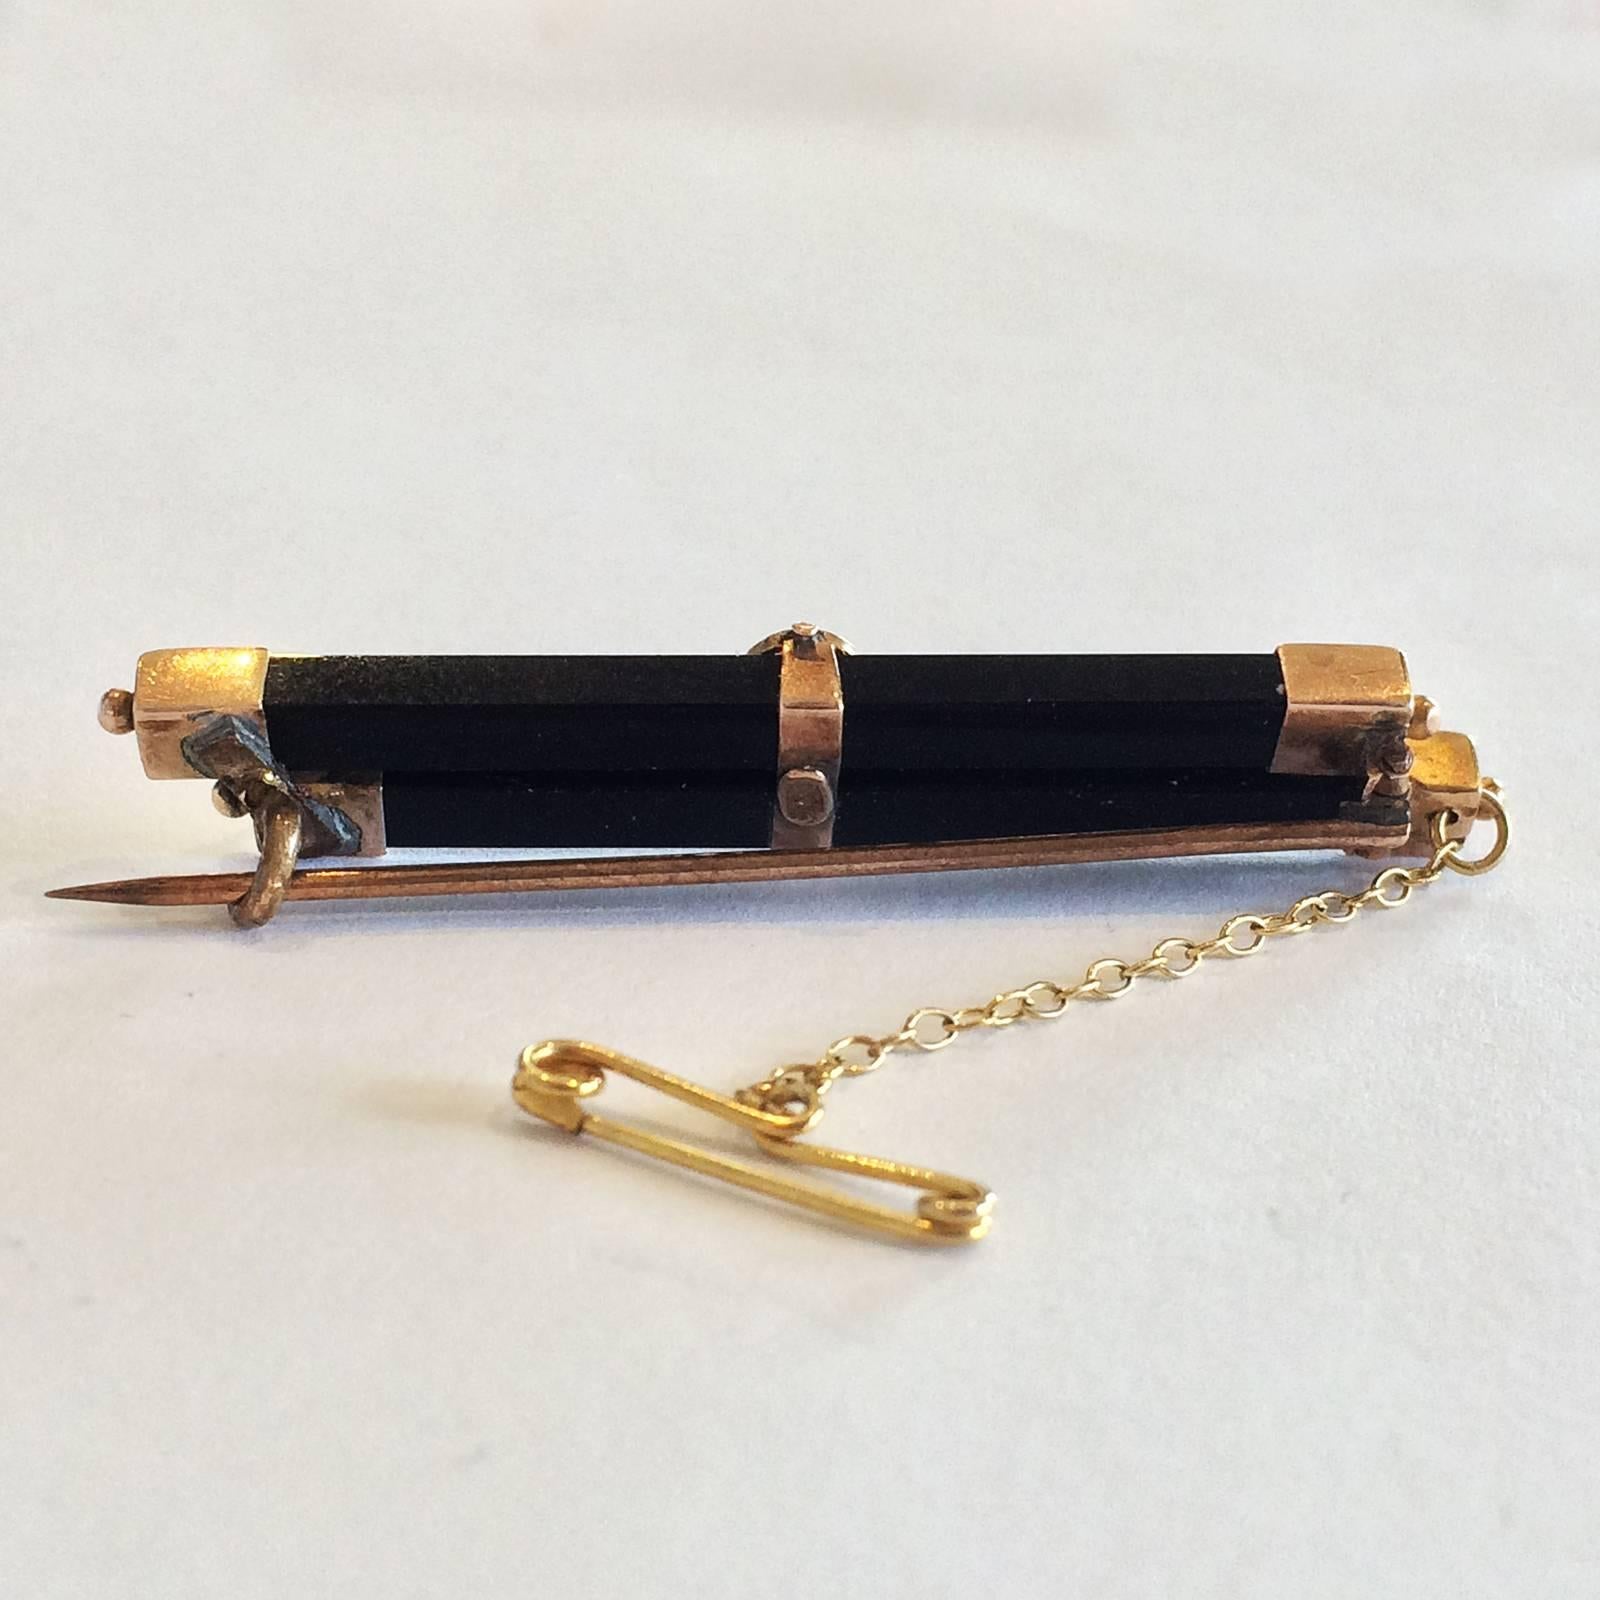 Art Deco Brooch of Onyx Bars, 9ct Rose Gold with Fine decoration holding a Seed Pearl at the centre, gold caps with a gold sphere to each end of the Onyx bars. Hallmarked to the rear of the central decoration, simply “9ct”, so it is possibly of